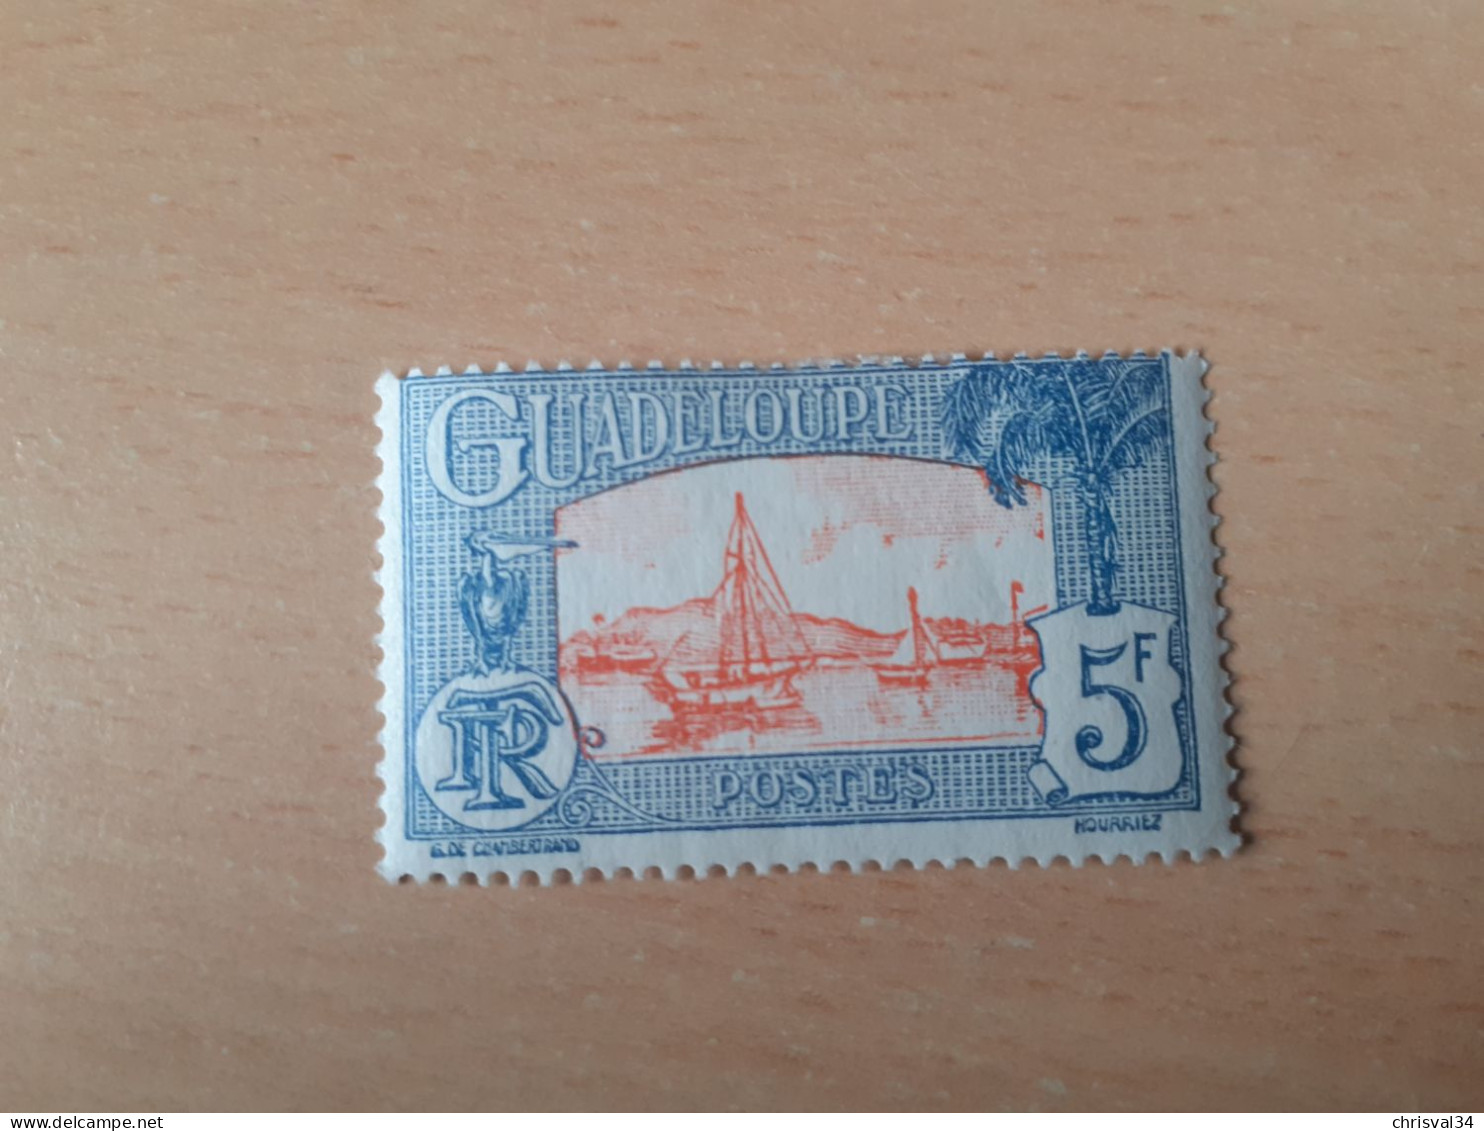 TIMBRE   GUADELOUPE       N  120    COTE  1,25   EUROS  NEUF  TRACE  CHARNIERE - Ungebraucht